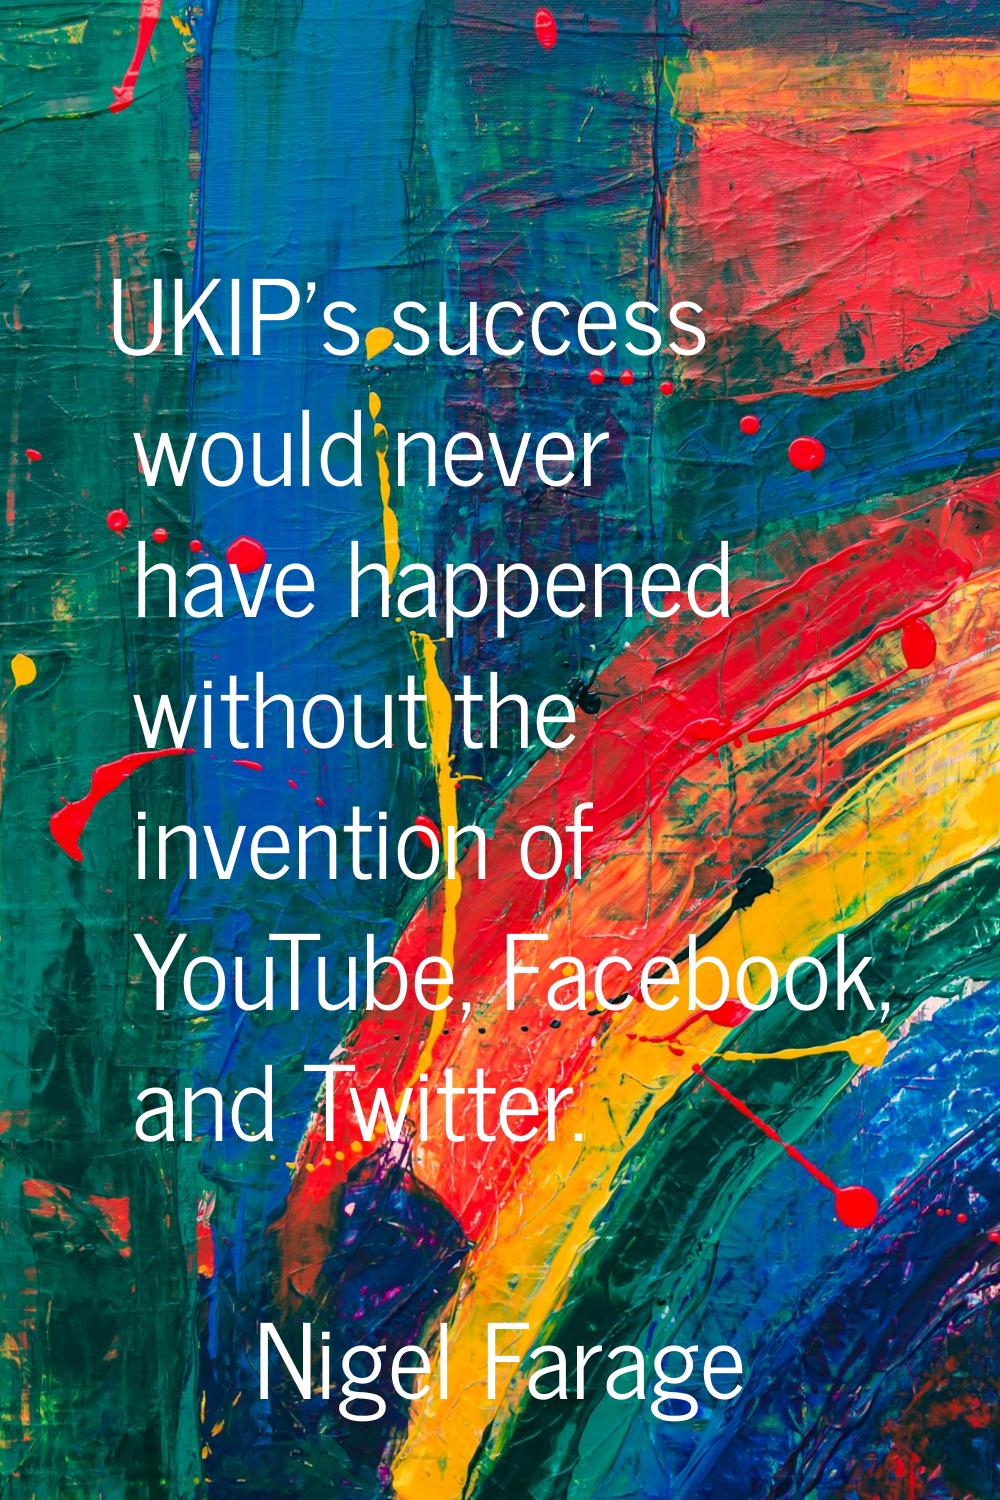 UKIP's success would never have happened without the invention of YouTube, Facebook, and Twitter.